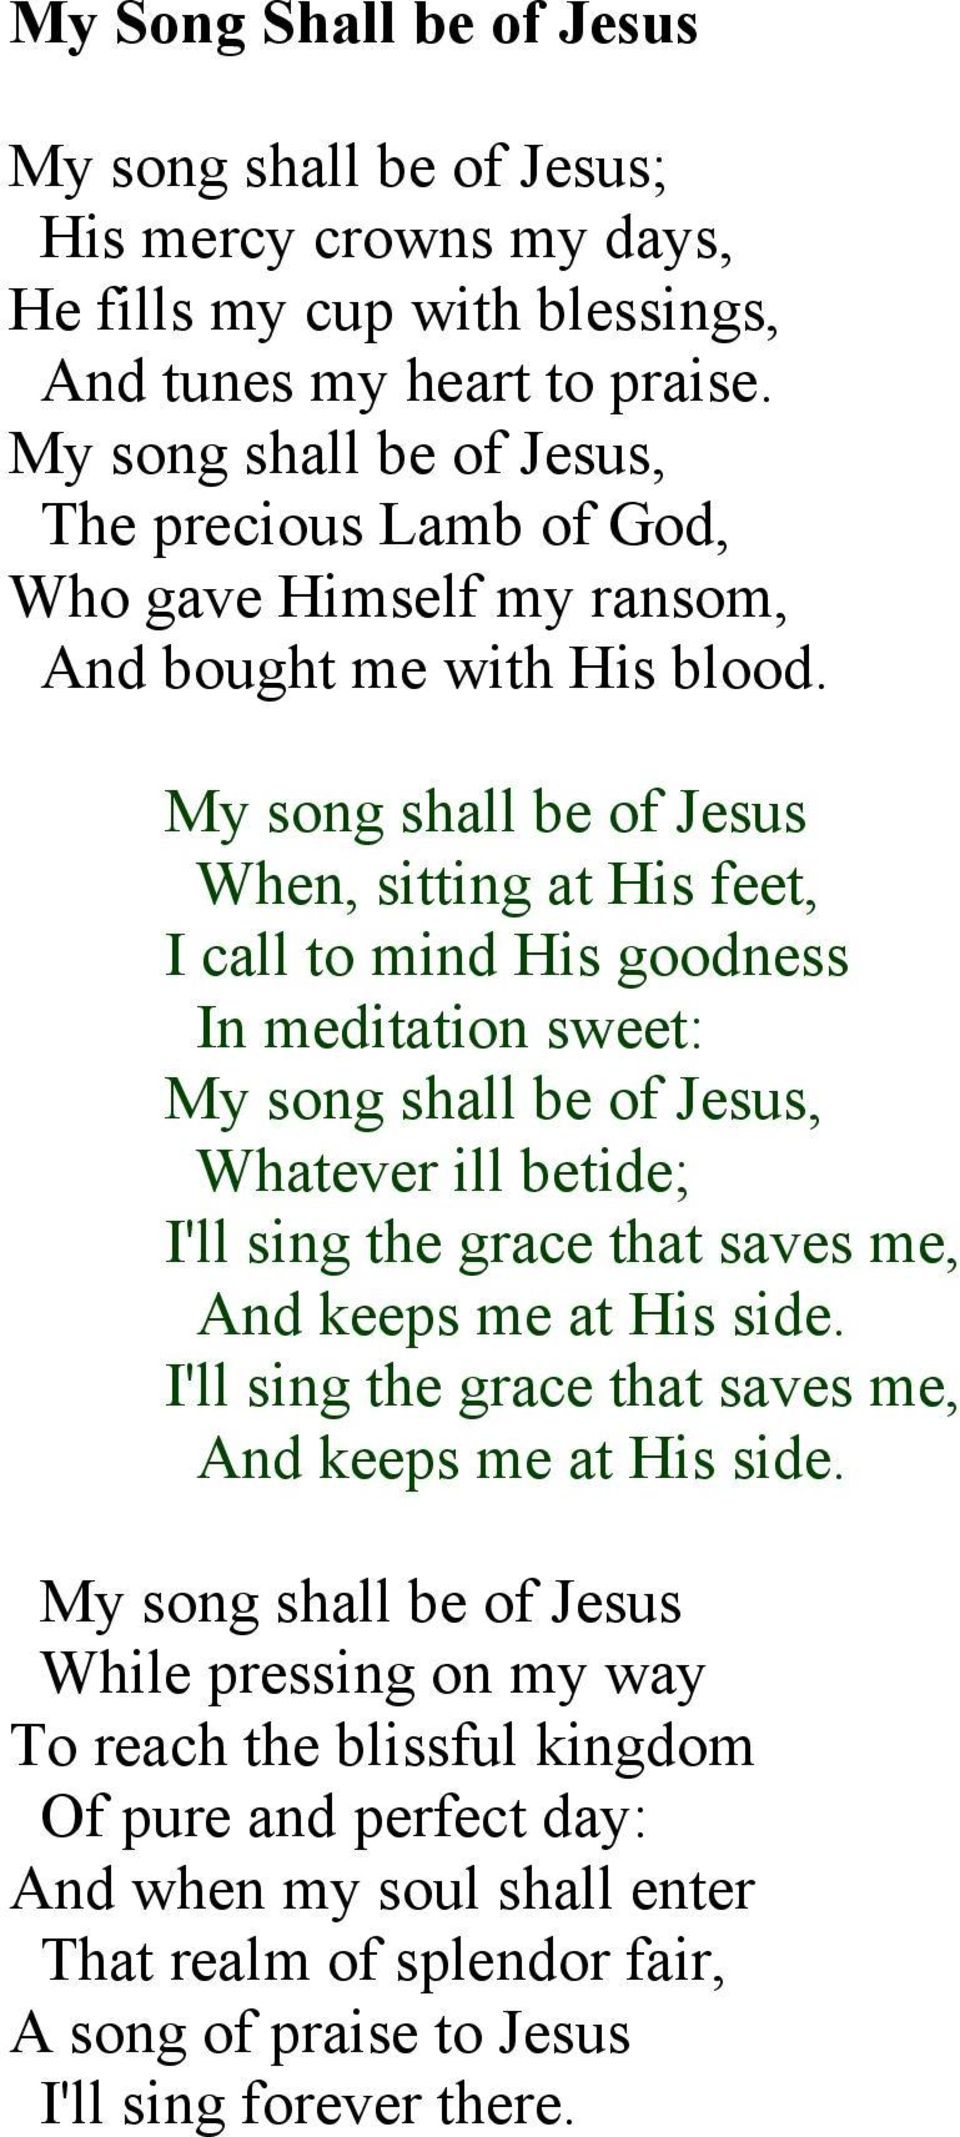 My song shall be of Jesus When, sitting at His feet, I call to mind His goodness In meditation sweet: My song shall be of Jesus, Whatever ill betide; I'll sing the grace that saves me,